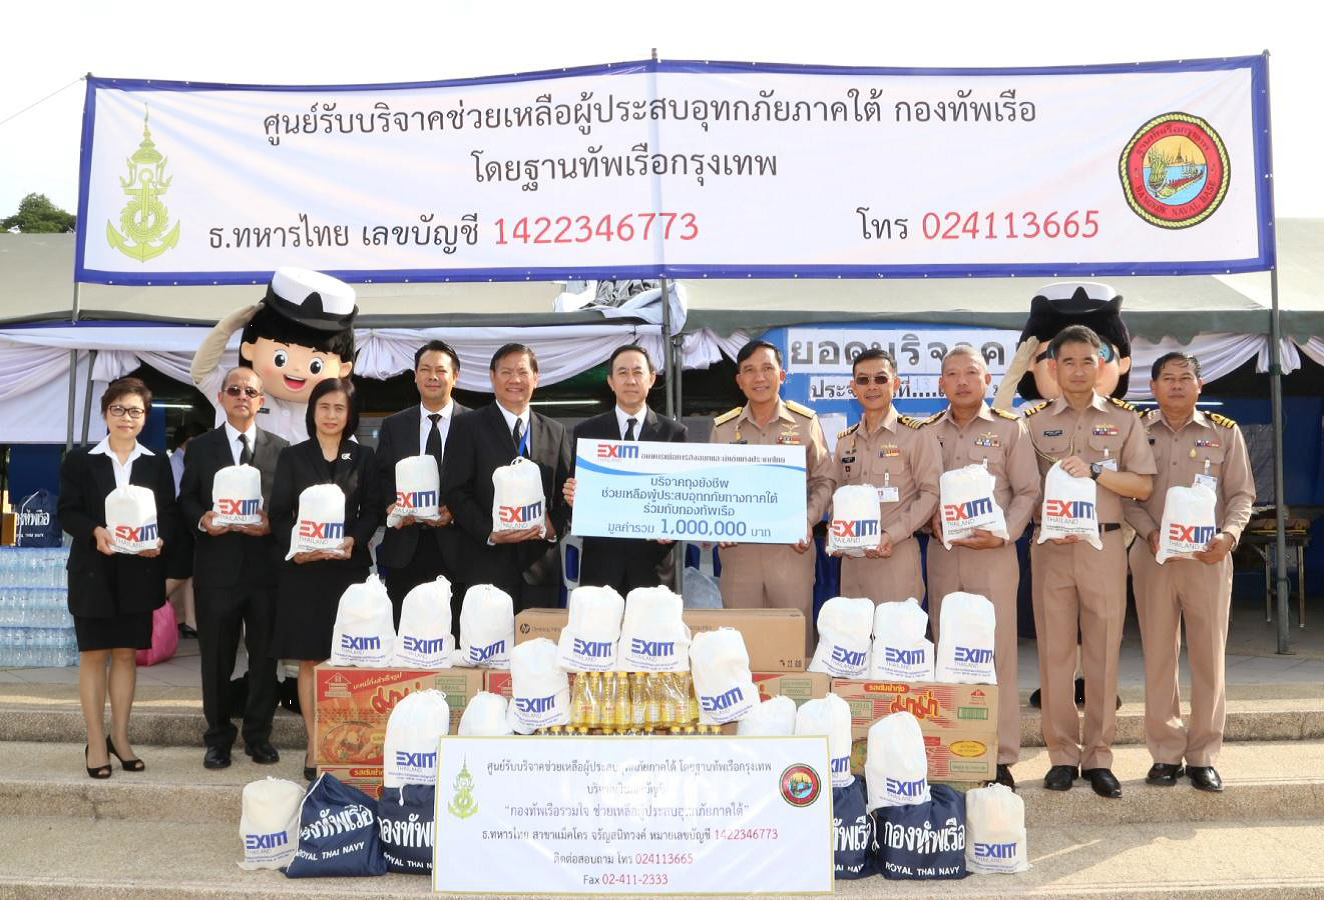 EXIM Thailand Donates Disaster Relief Bags and Living Supplies to Southern Flood Victims through the Royal Thai Navy